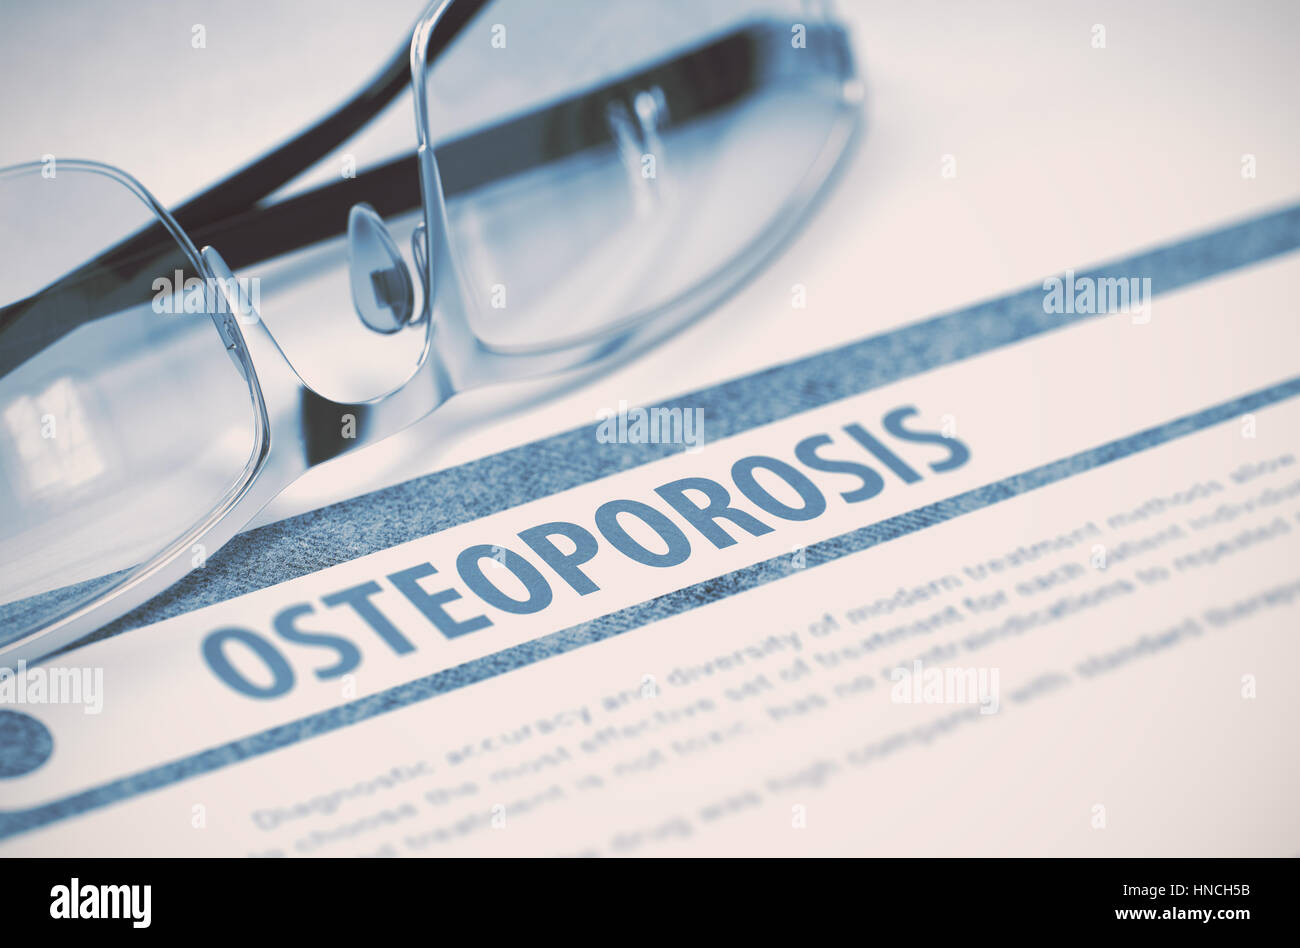 Diagnosis - Osteoporosis. Medical Concept. 3D Illustration. Stock Photo